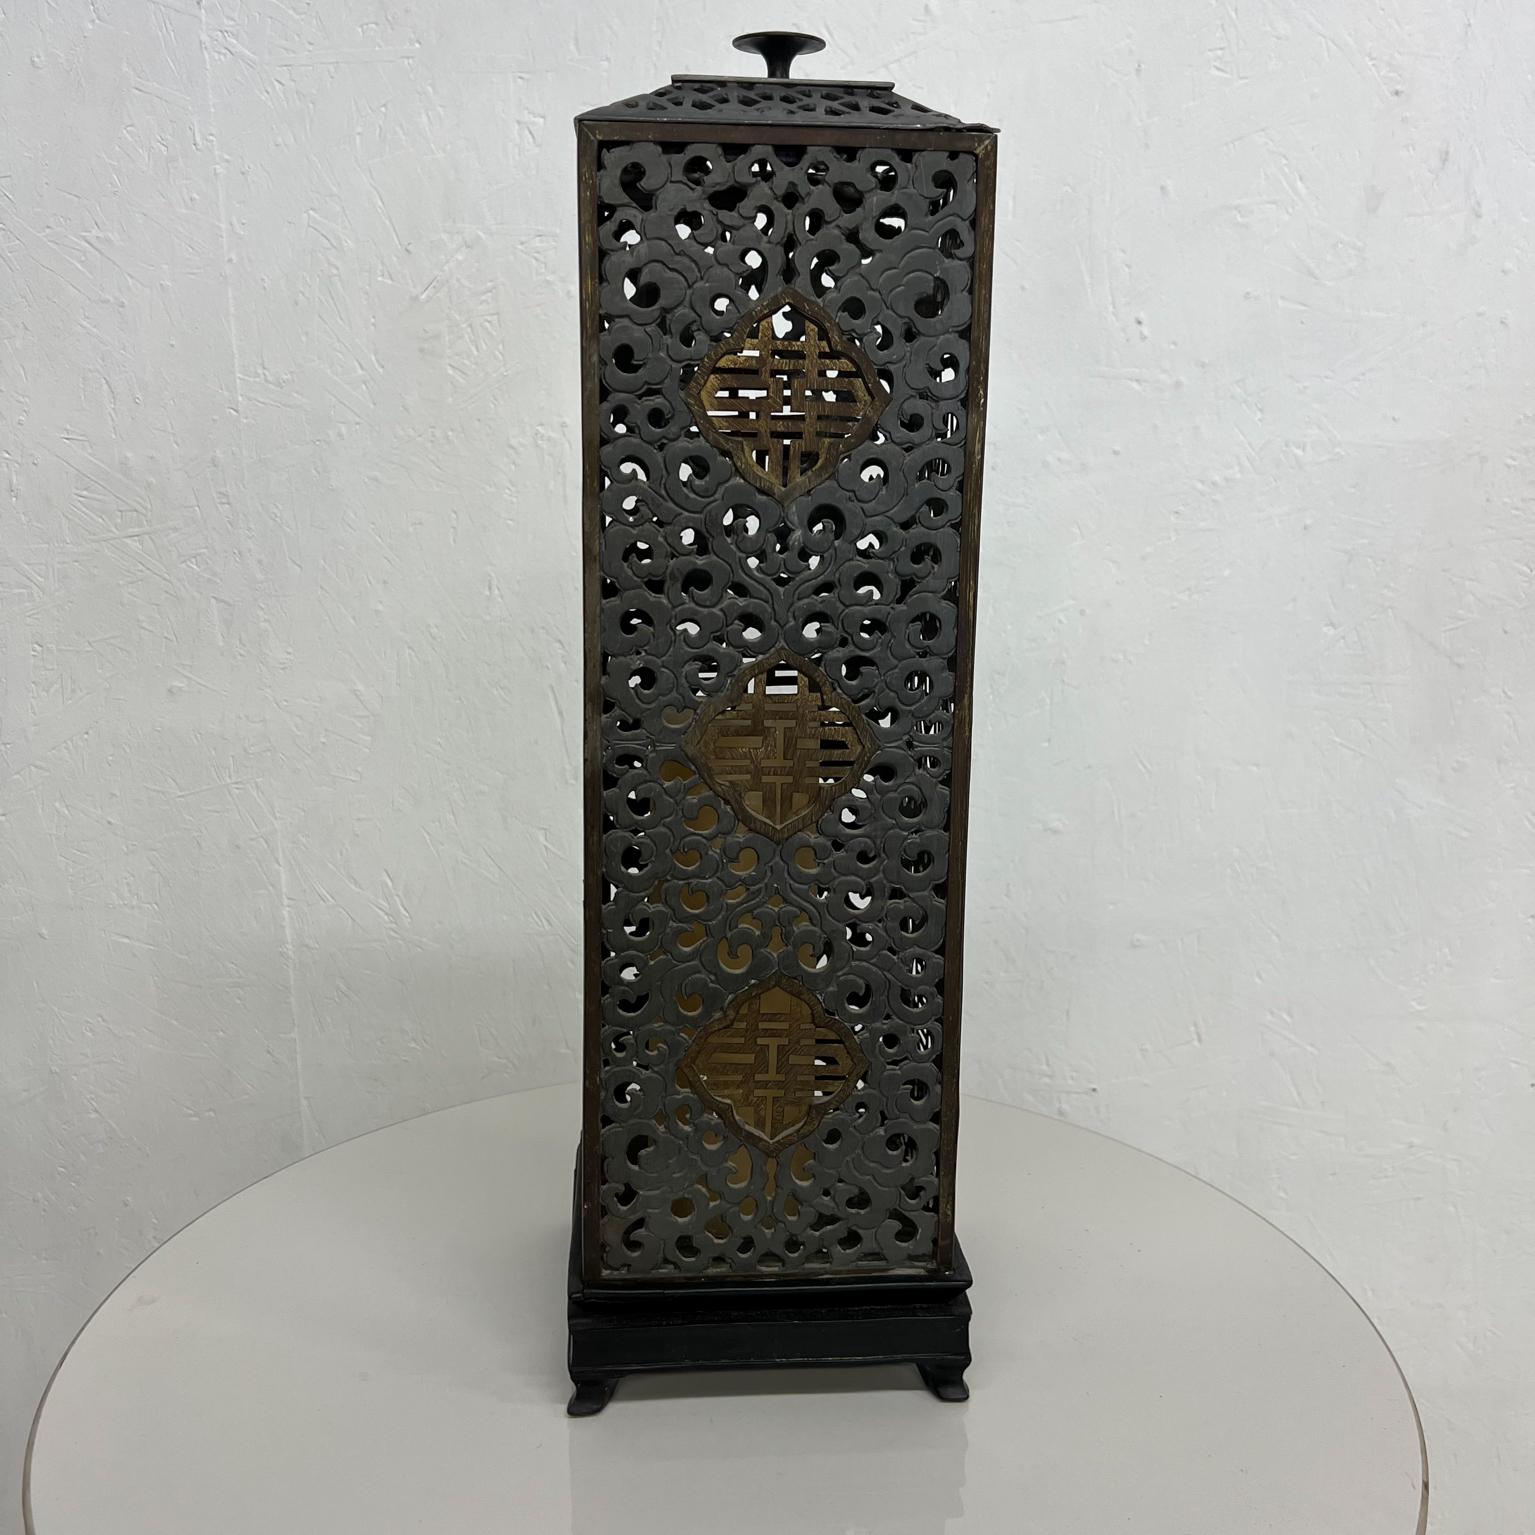 Artisan vintage handcrafted Chinese tall lantern candle holder incense burner sculptural cut brass
Made in lead and brass, mounted on a wood base. Comes with a lid.
Exquisitely crafted. Sculptural cut brass.
No markings
22 tall x 7 x 7
Preowned